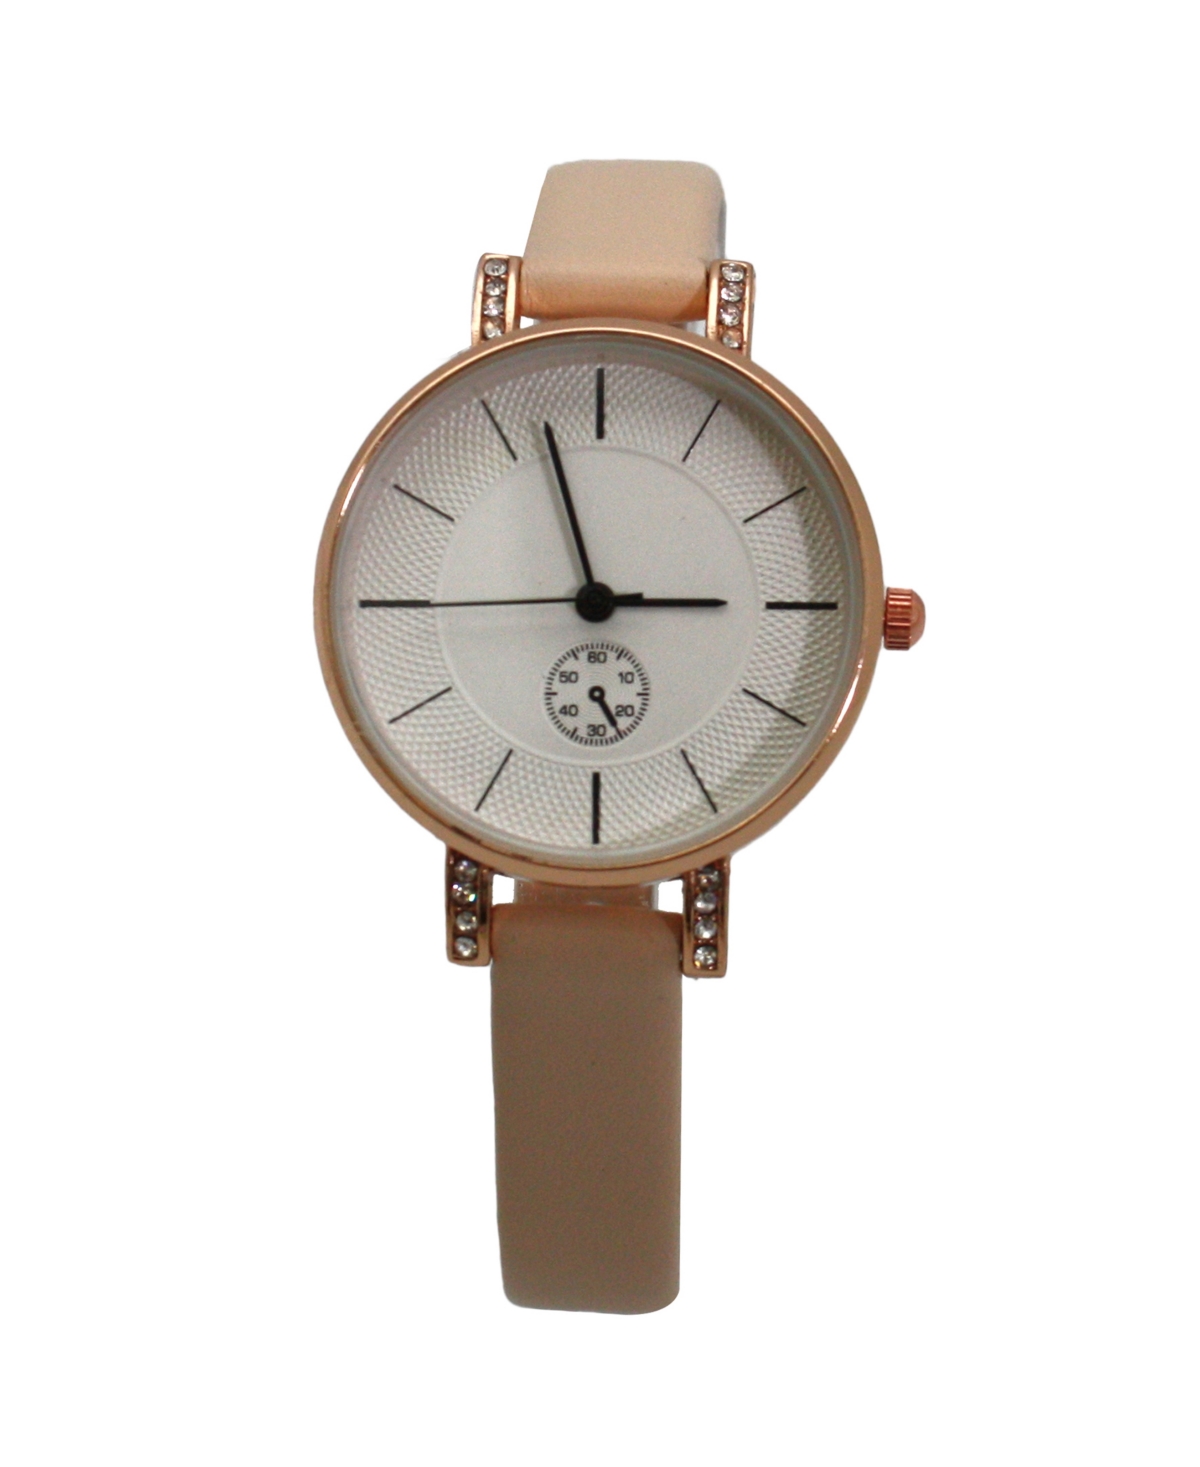 Soft Small Face Chronograph Women Watch - Light/Pastel Brown